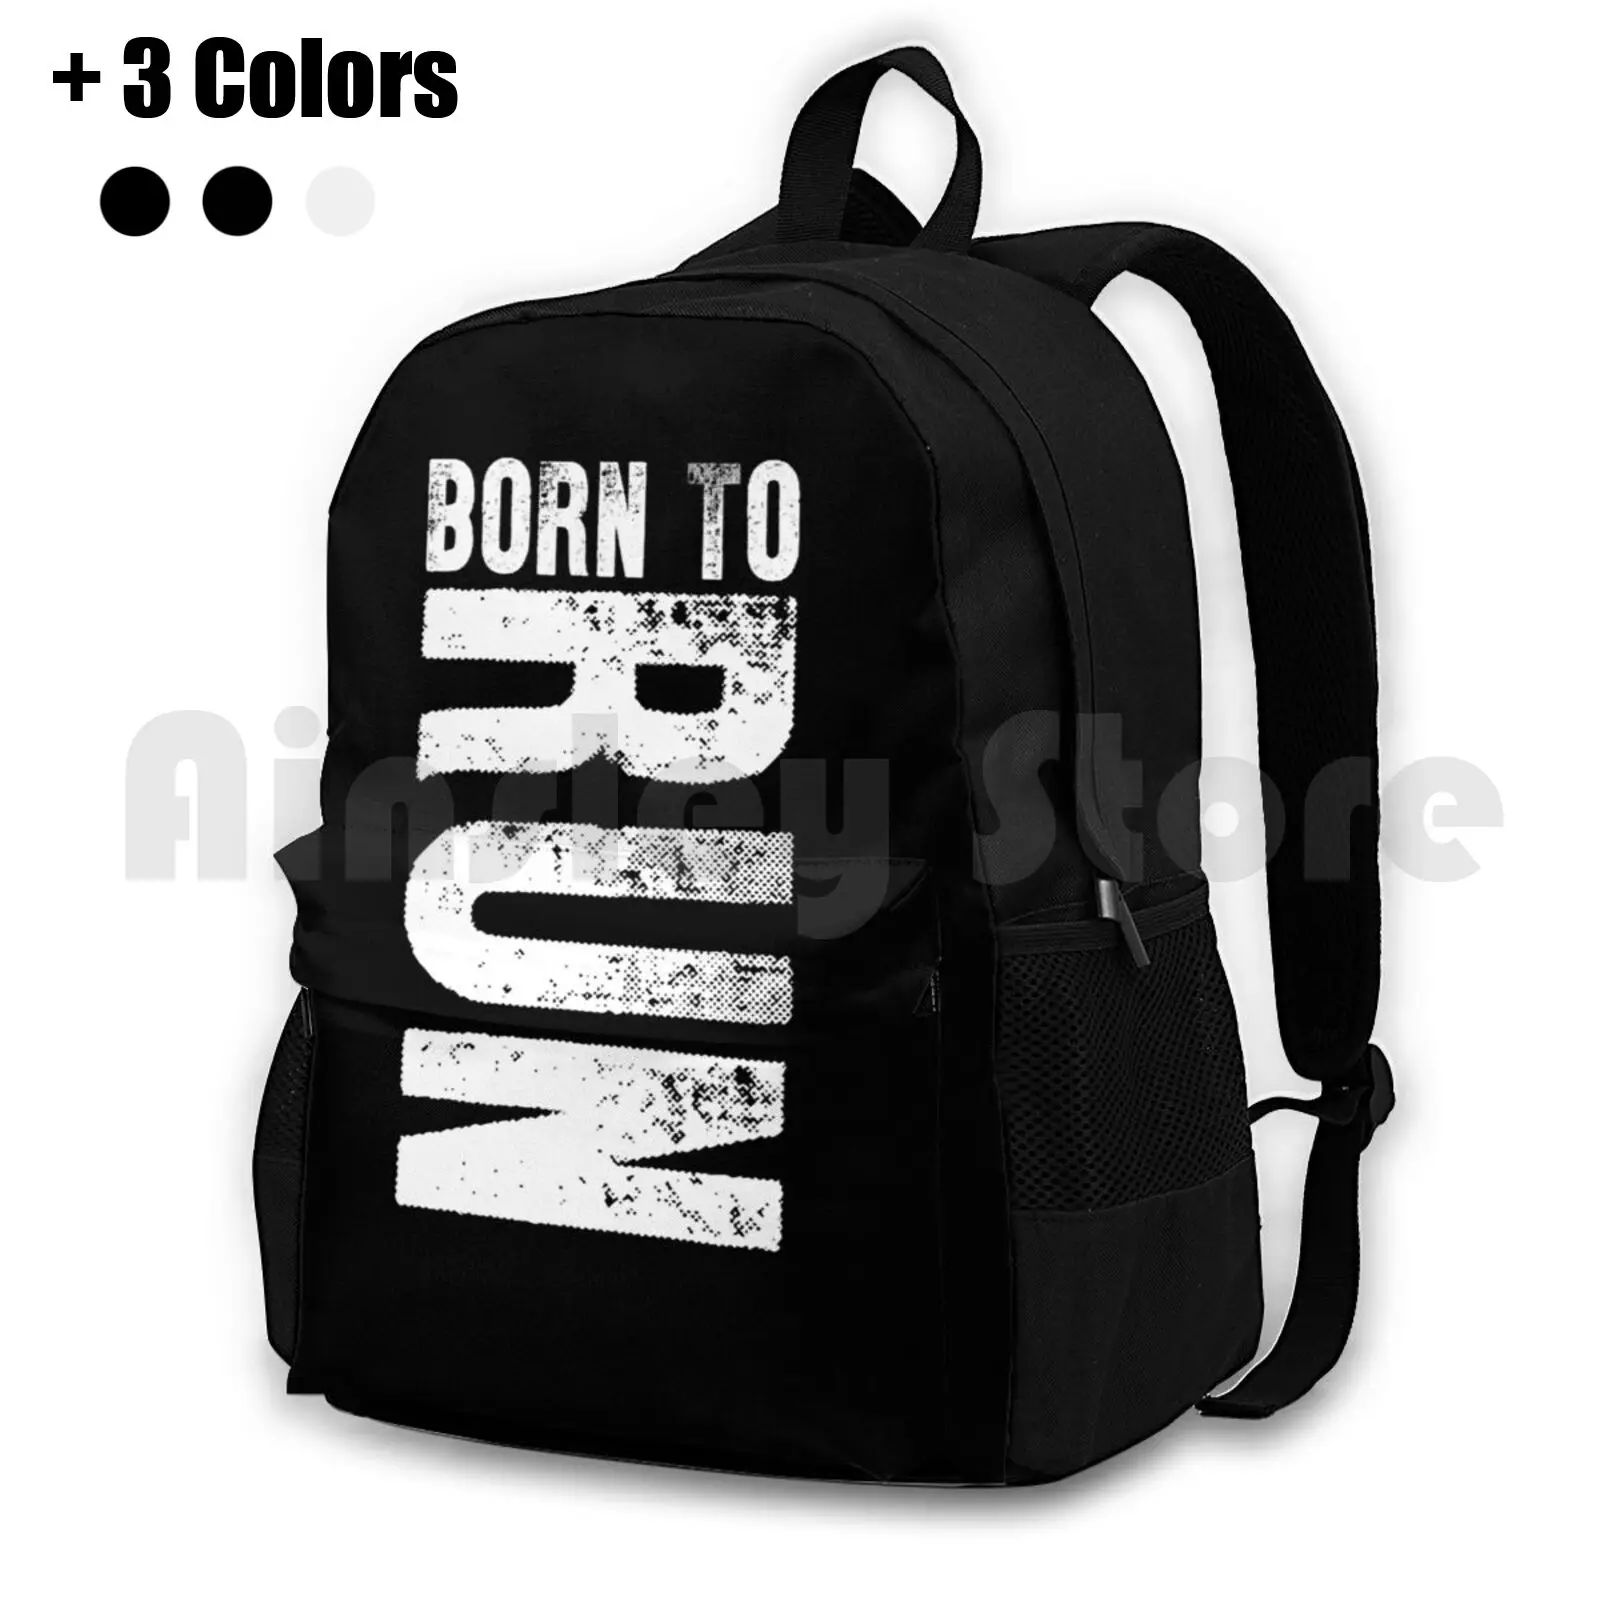 

Born To Run Running Sports Lover Gift Idea Outdoor Hiking Backpack Riding Climbing Sports Bag Born To Run Run Runner Running